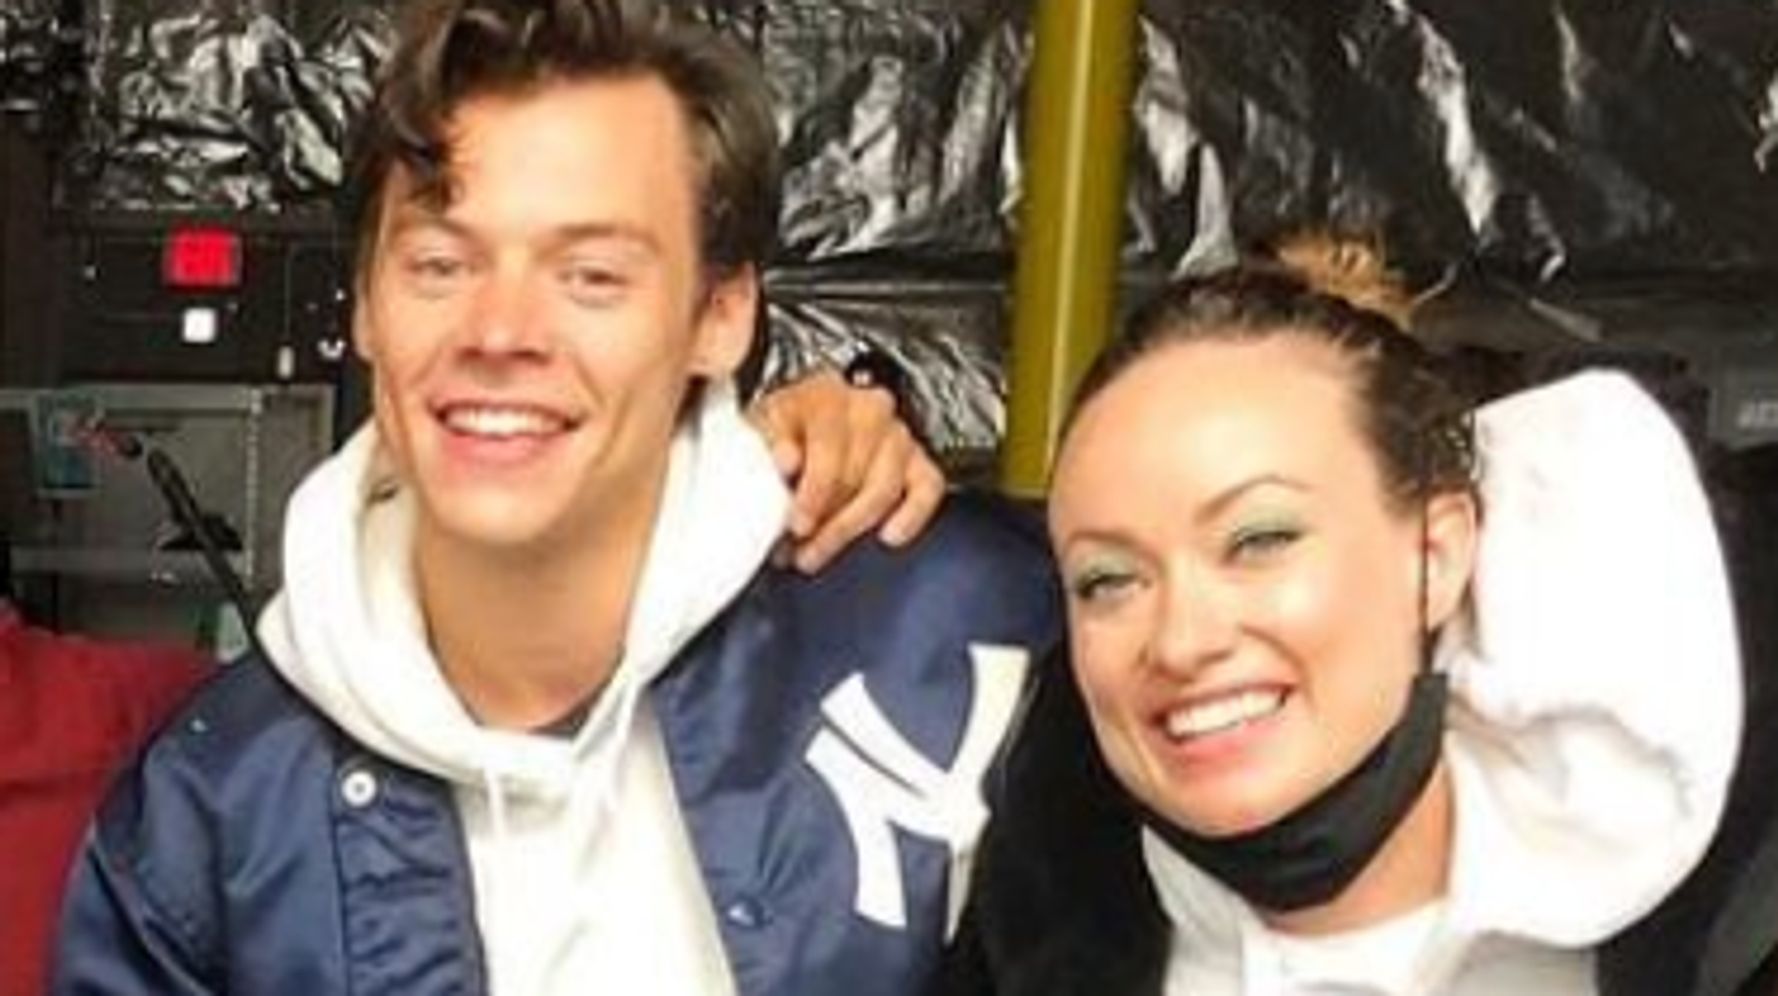 Olivia Wilde is really in Harry Styles because she played a role in her film directed by women